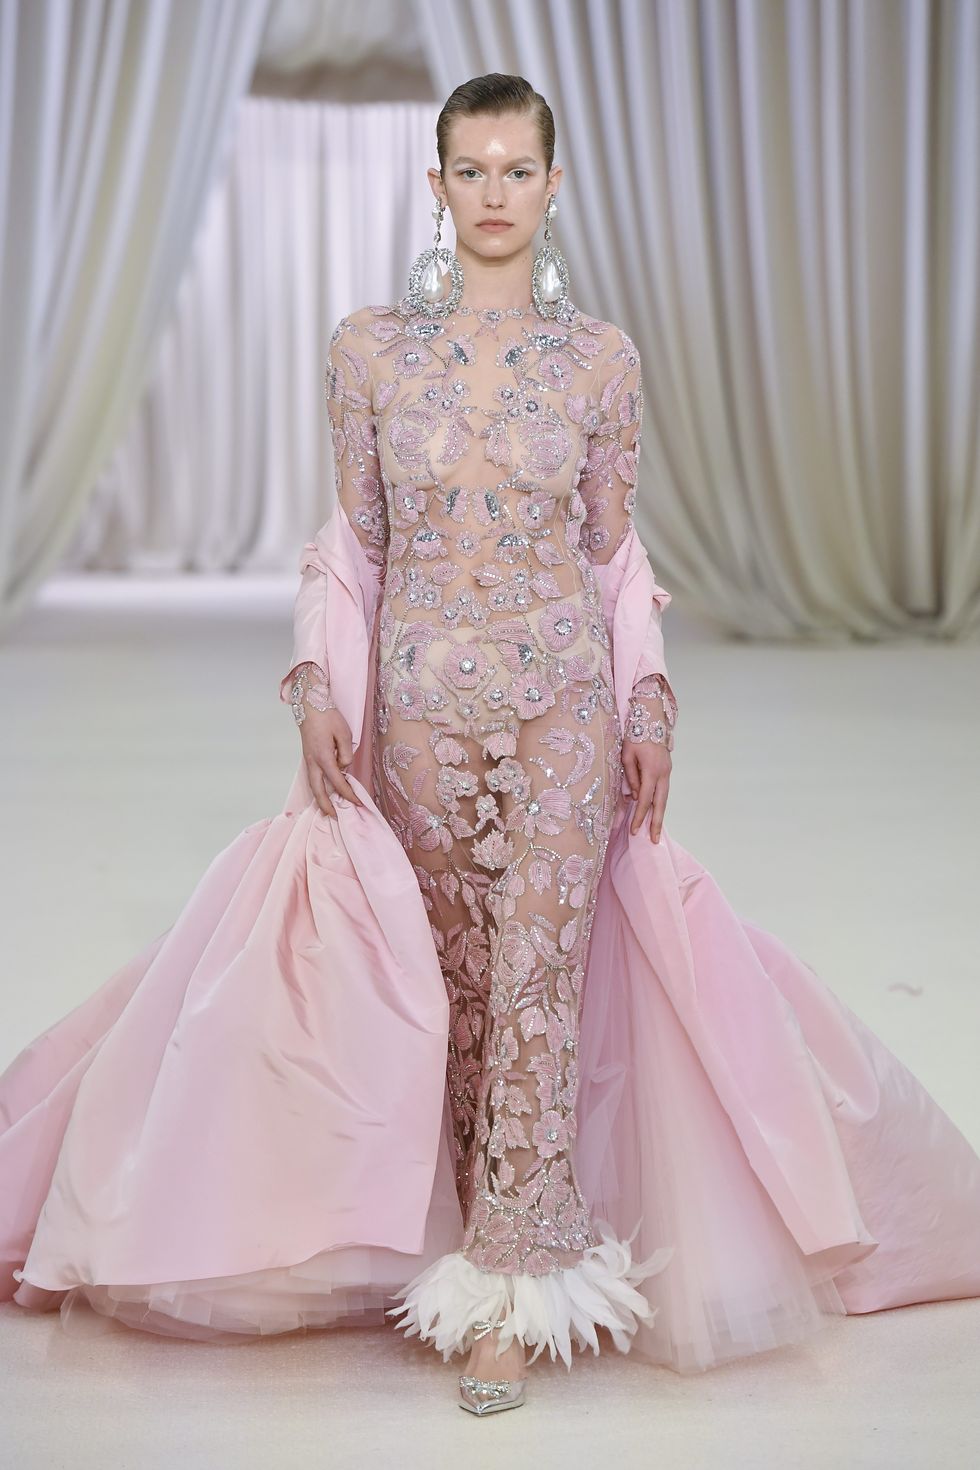 Giambattista Valli's couture presentation is wowed with ultra-voluminous dresses, liquid metallics, and lovely, vibrant pastels, as he is always one to enjoy the indulgence.